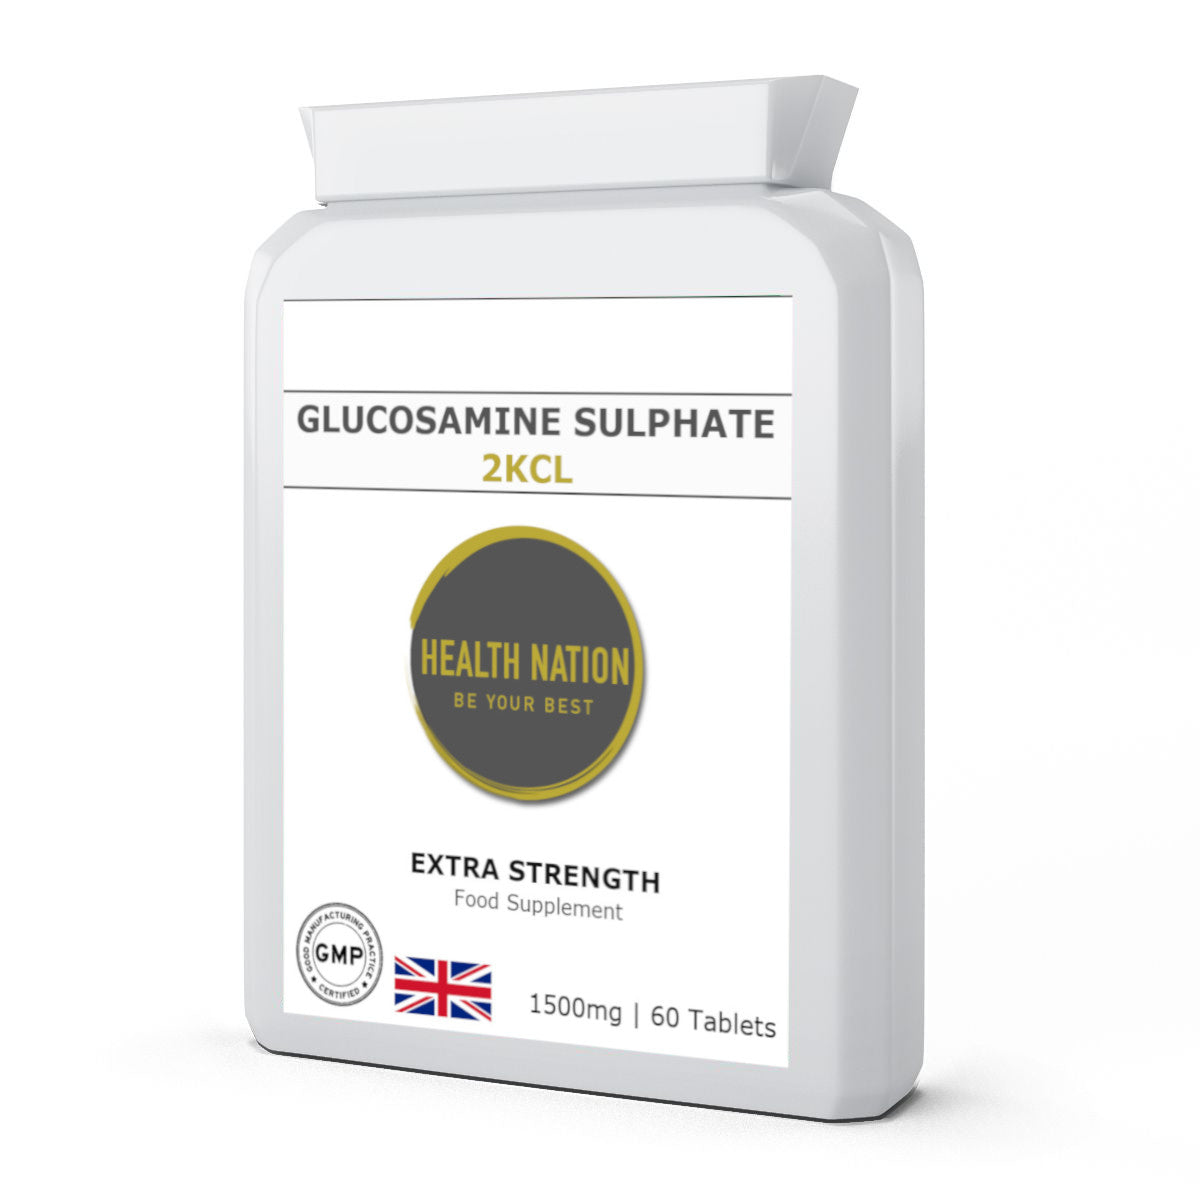 Glucosamine Sulphate (Sulfate)| Helps with Vibrant Skin, Cartilage Health, Joint Paint and Weight Loss | 2KCL 1500mg 60 Tablets - Health Nation